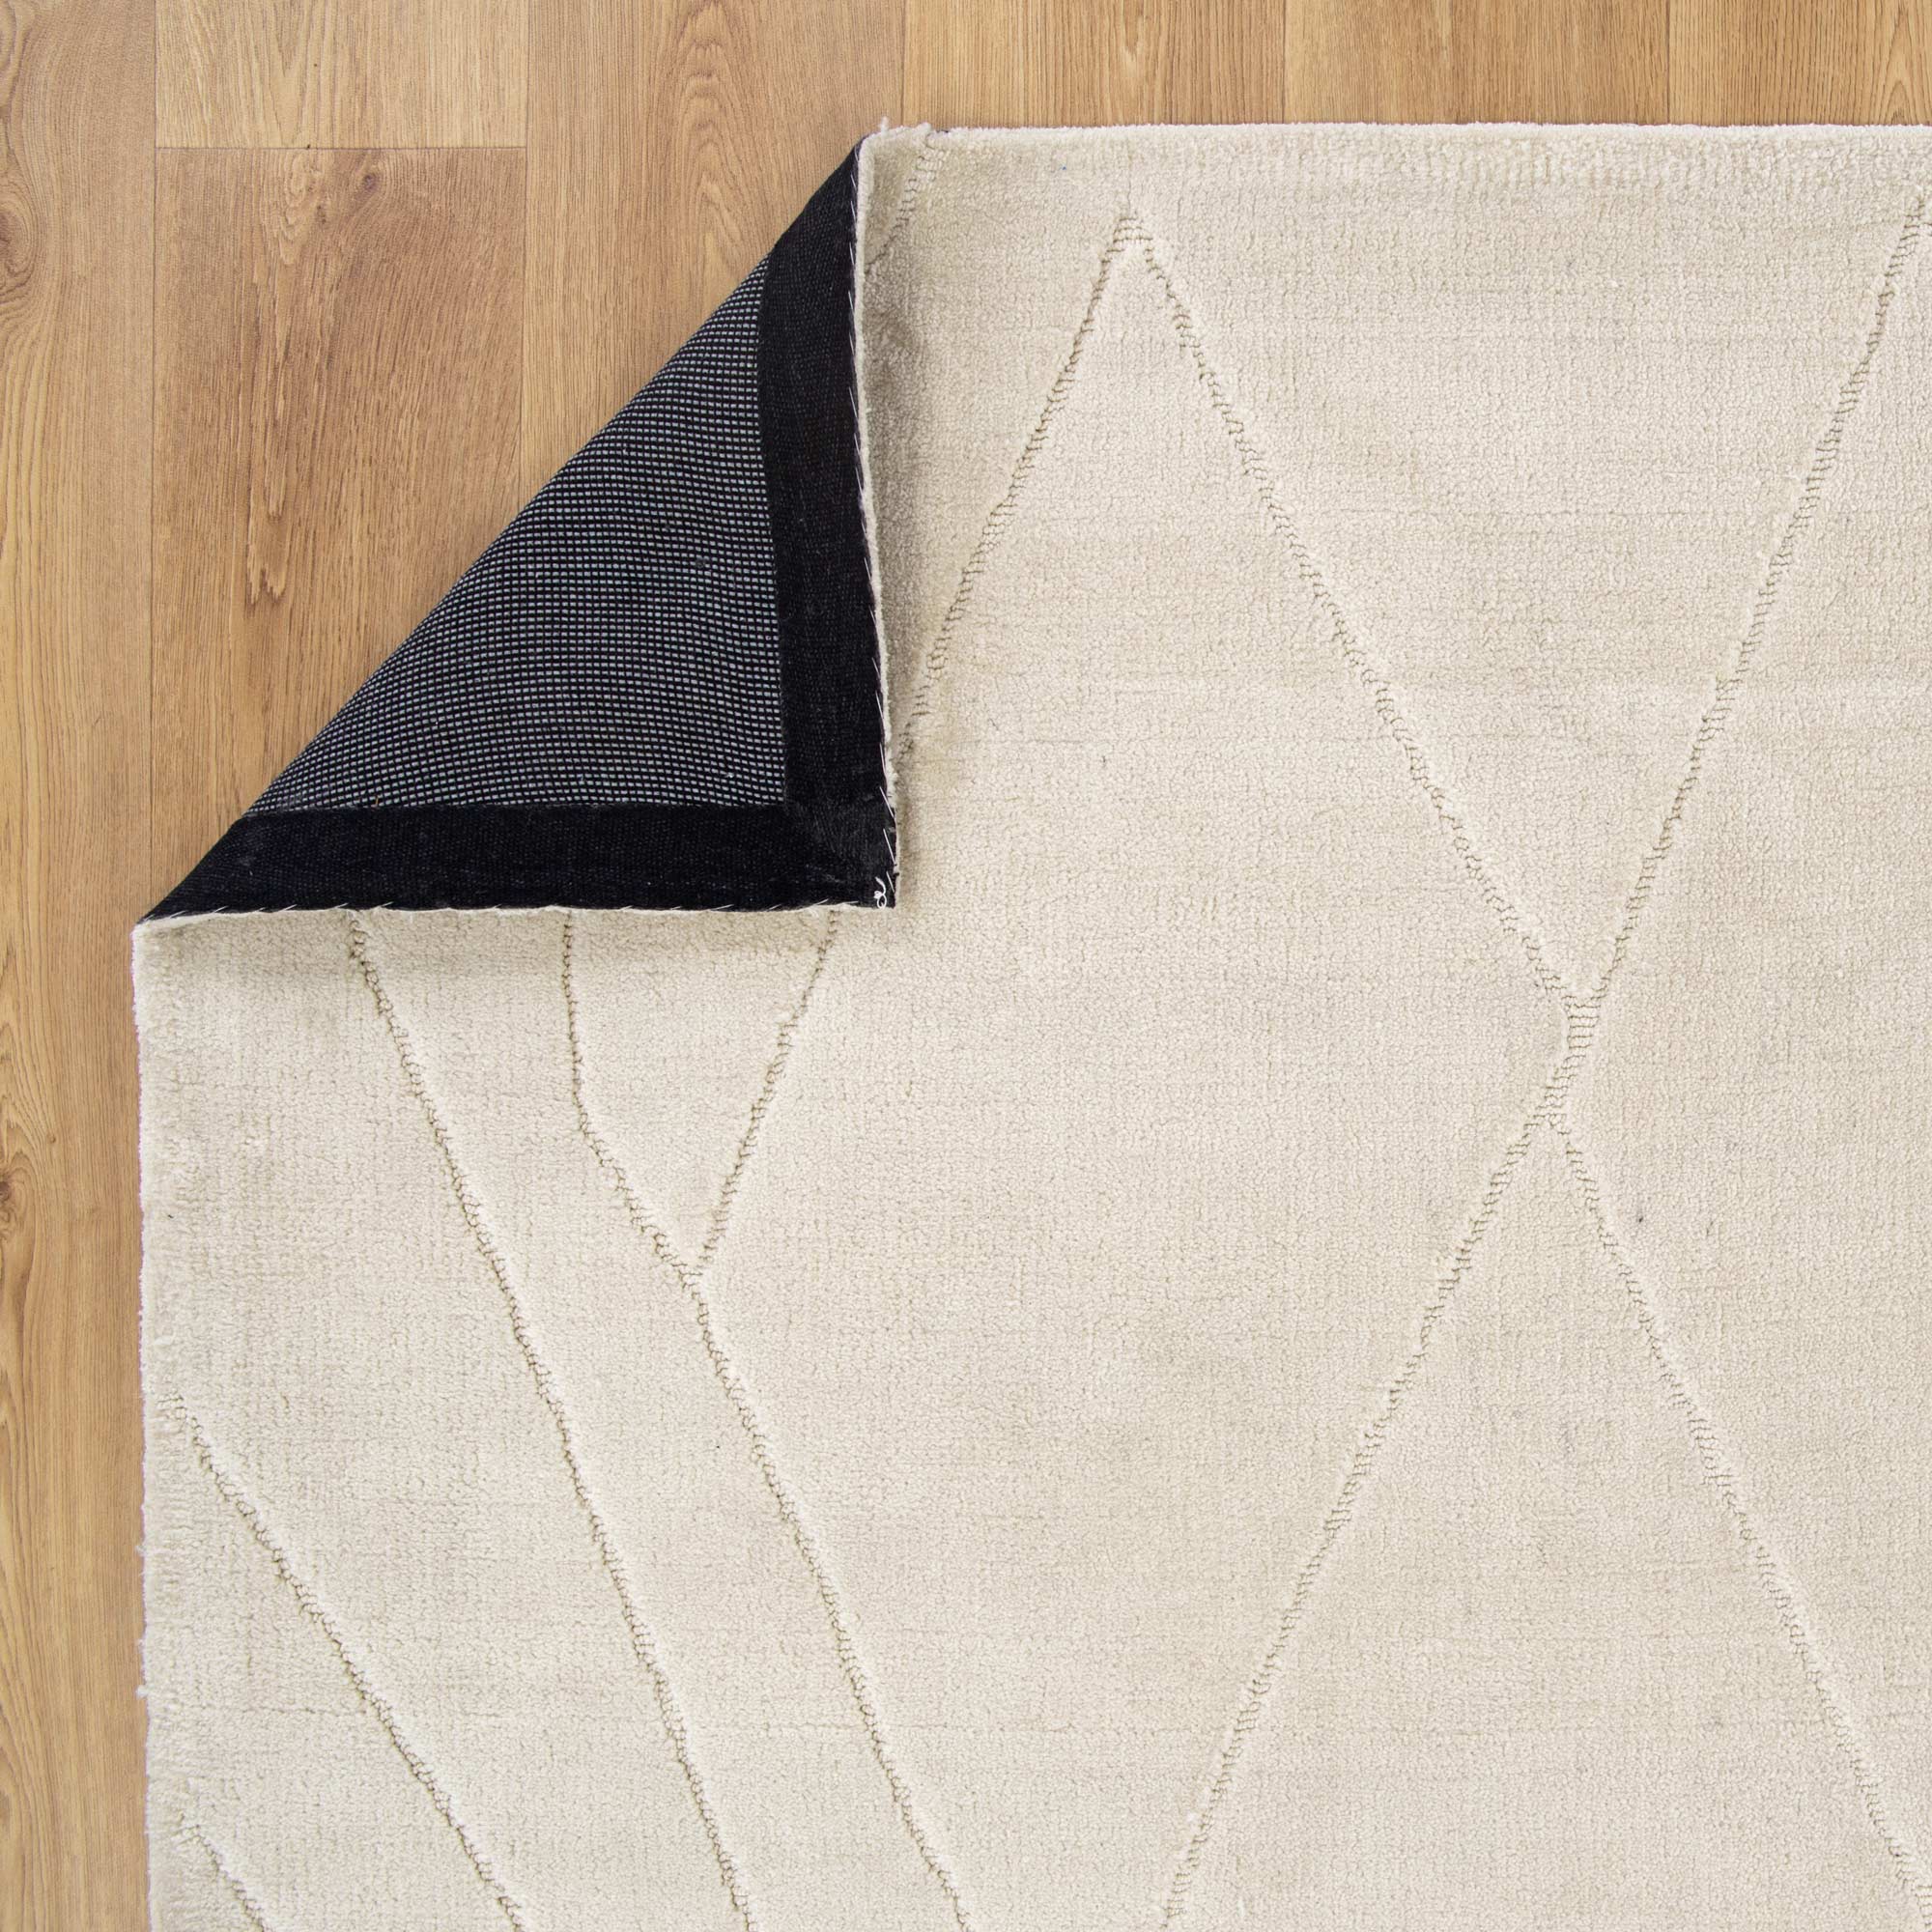 Image of the Kendra Rug folded over, displaying both the top and bottom surfaces to highlight the consistent quality and finish of the rug's design and material.